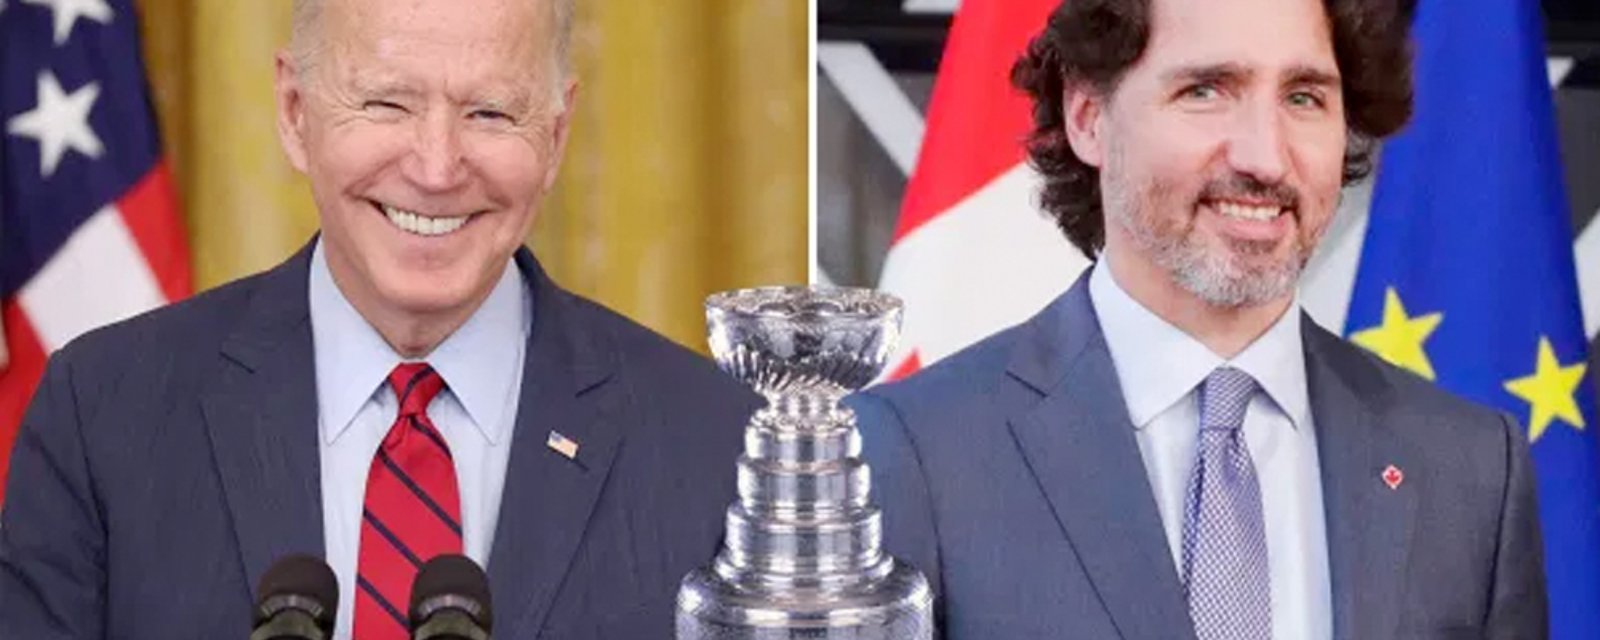 Biden and Trudeau make a bet on the Stanley Cup Final